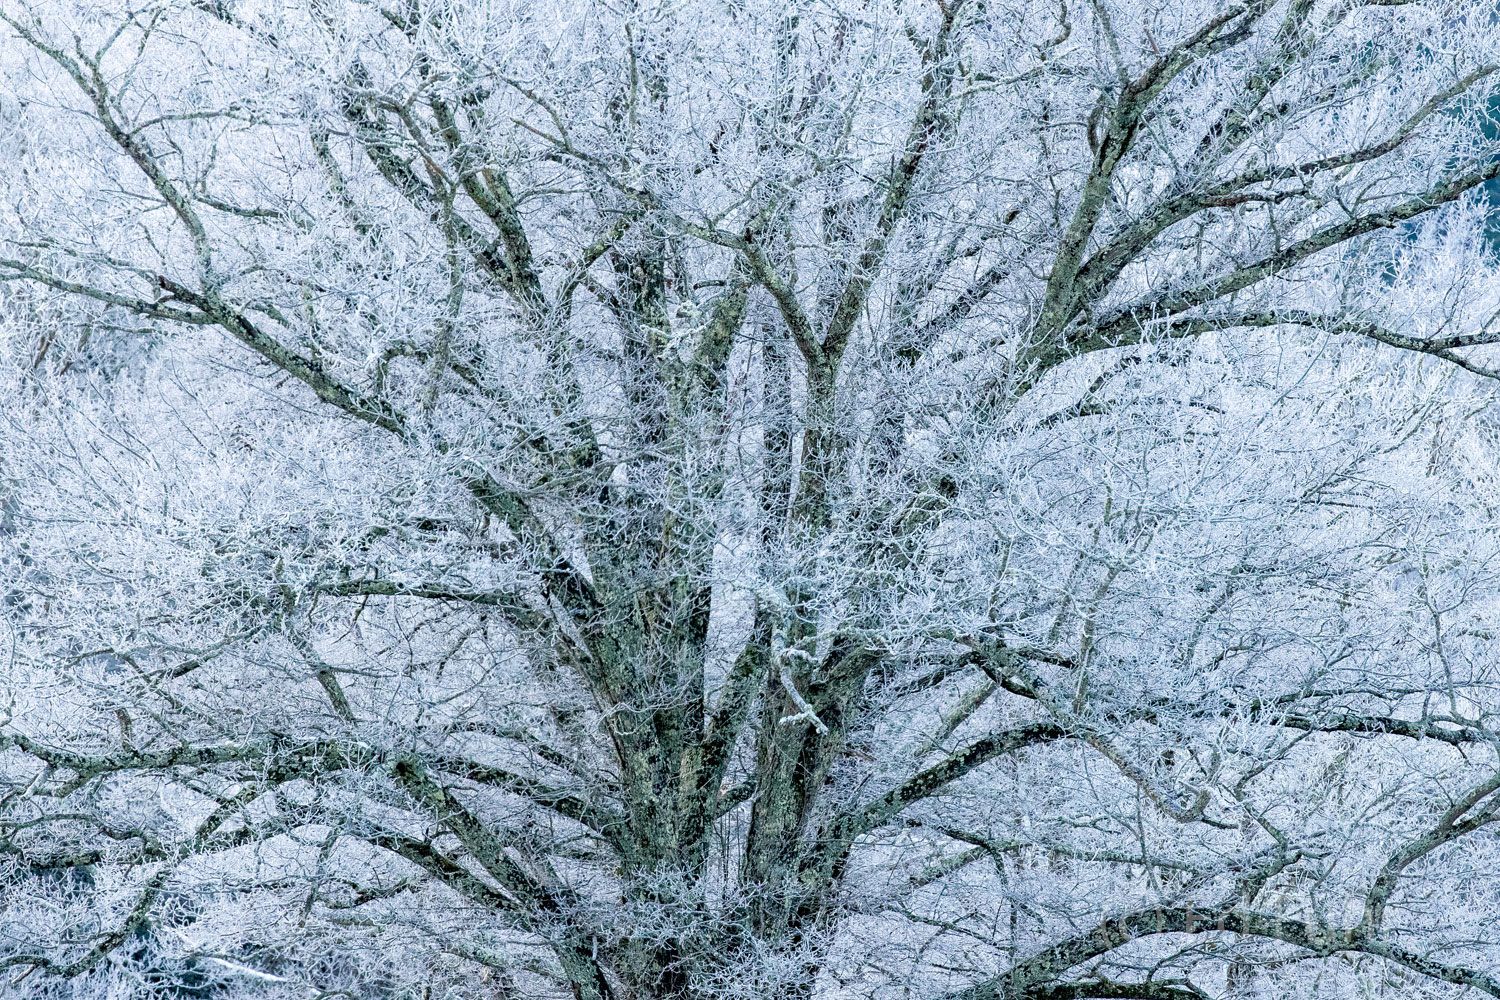 A large oak is etched in hoar frost and ice on this near zero degree morning in Cades Cove.